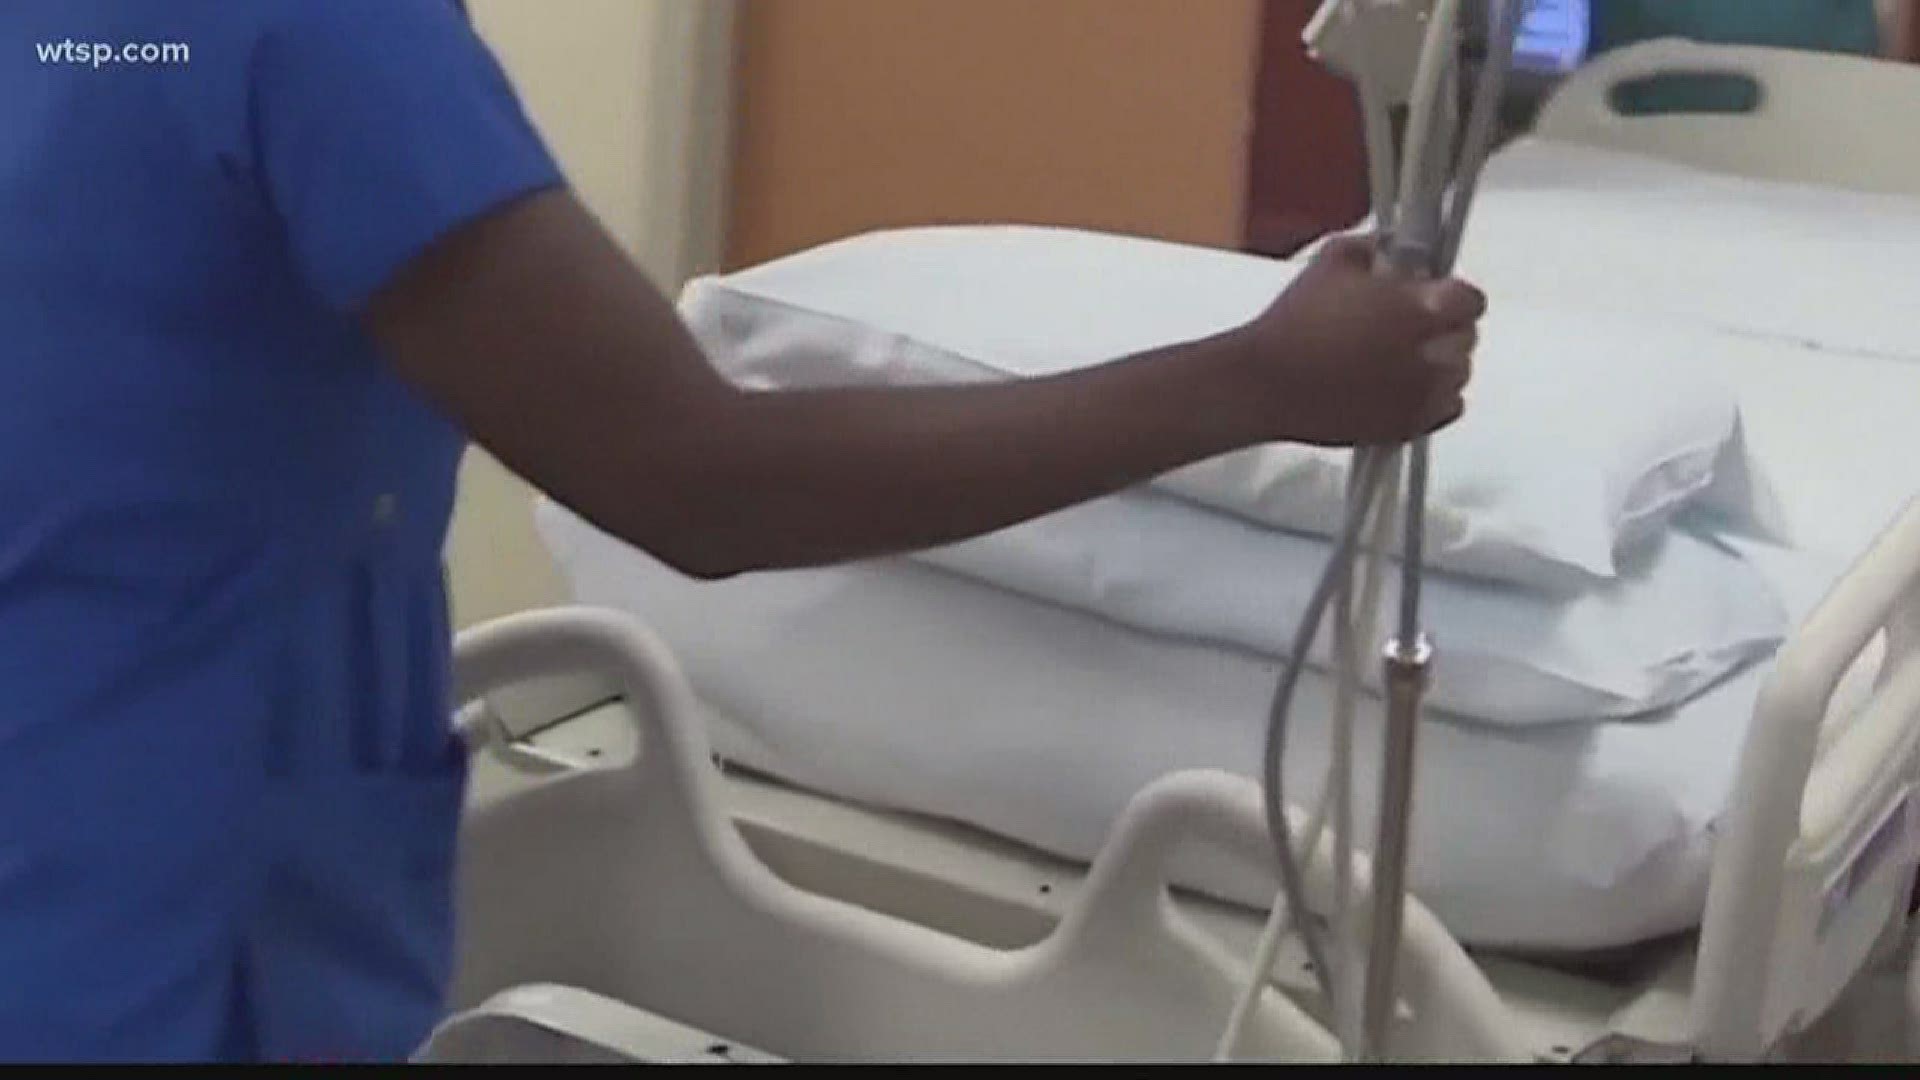 Tampa Bay area hospital workers are seeing their hours cut in the midst of a global coronavirus crisis.